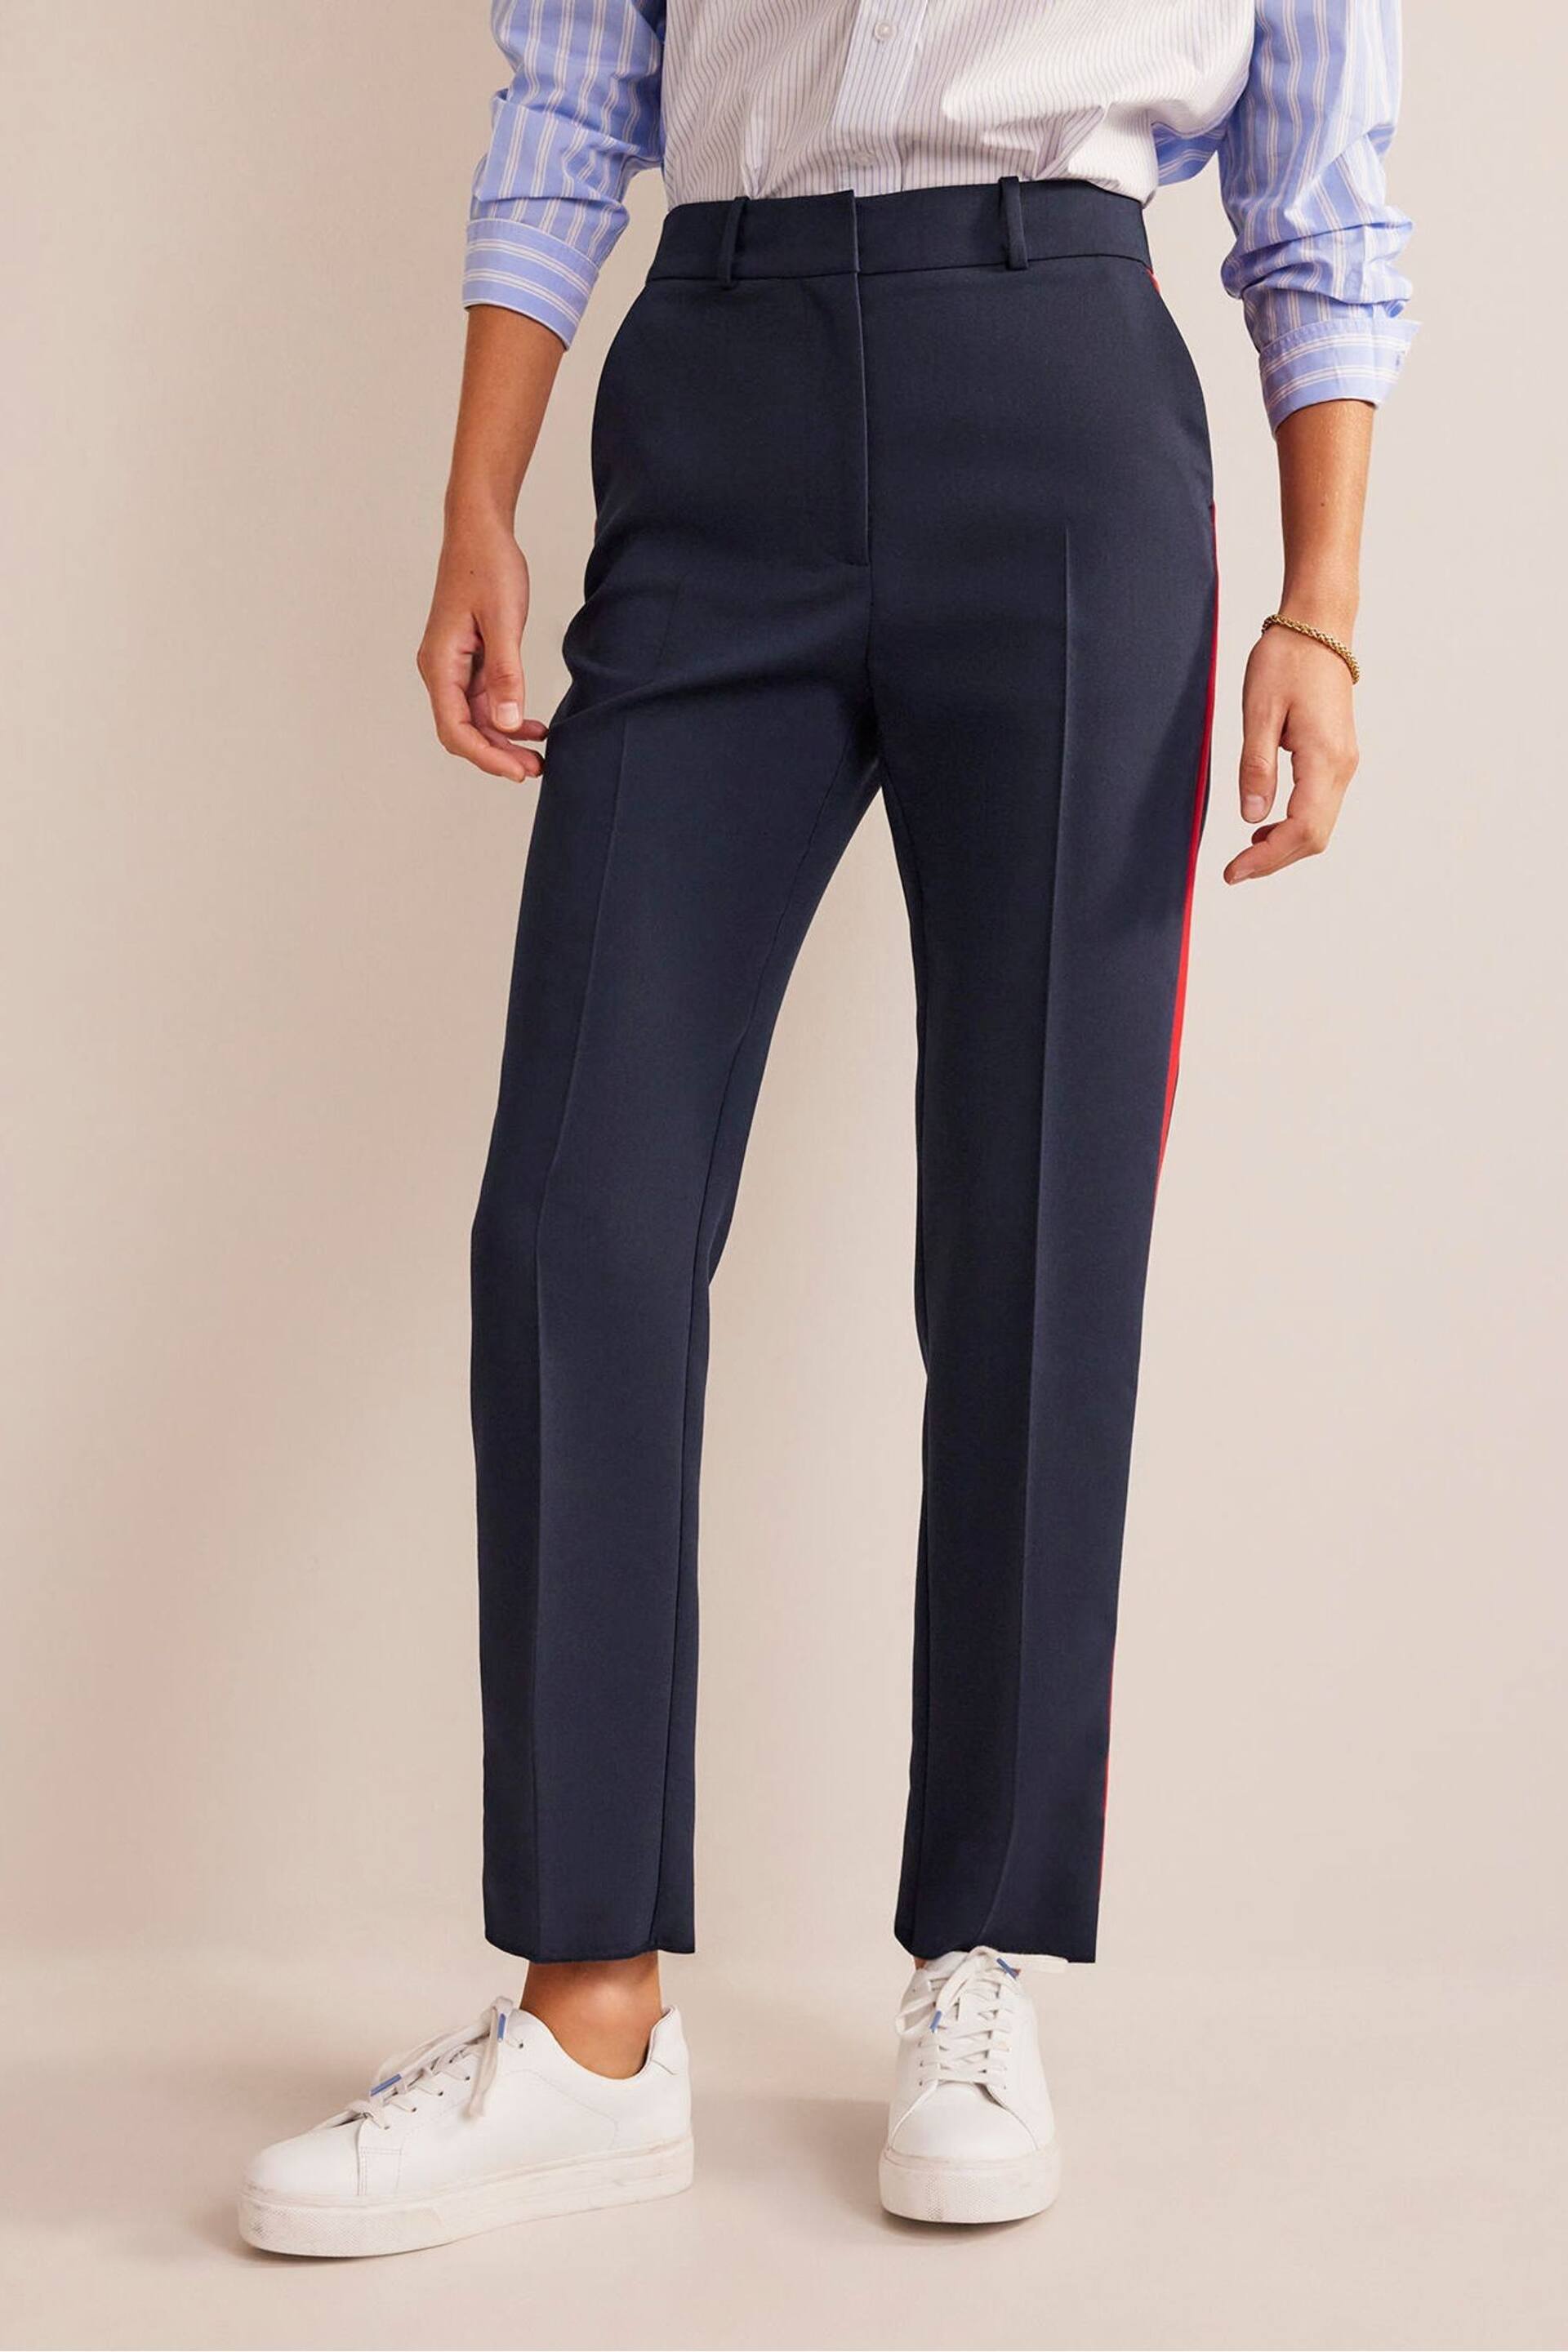 Boden Blue Ground Petite Kew Side Stripe Trousers - Image 1 of 5